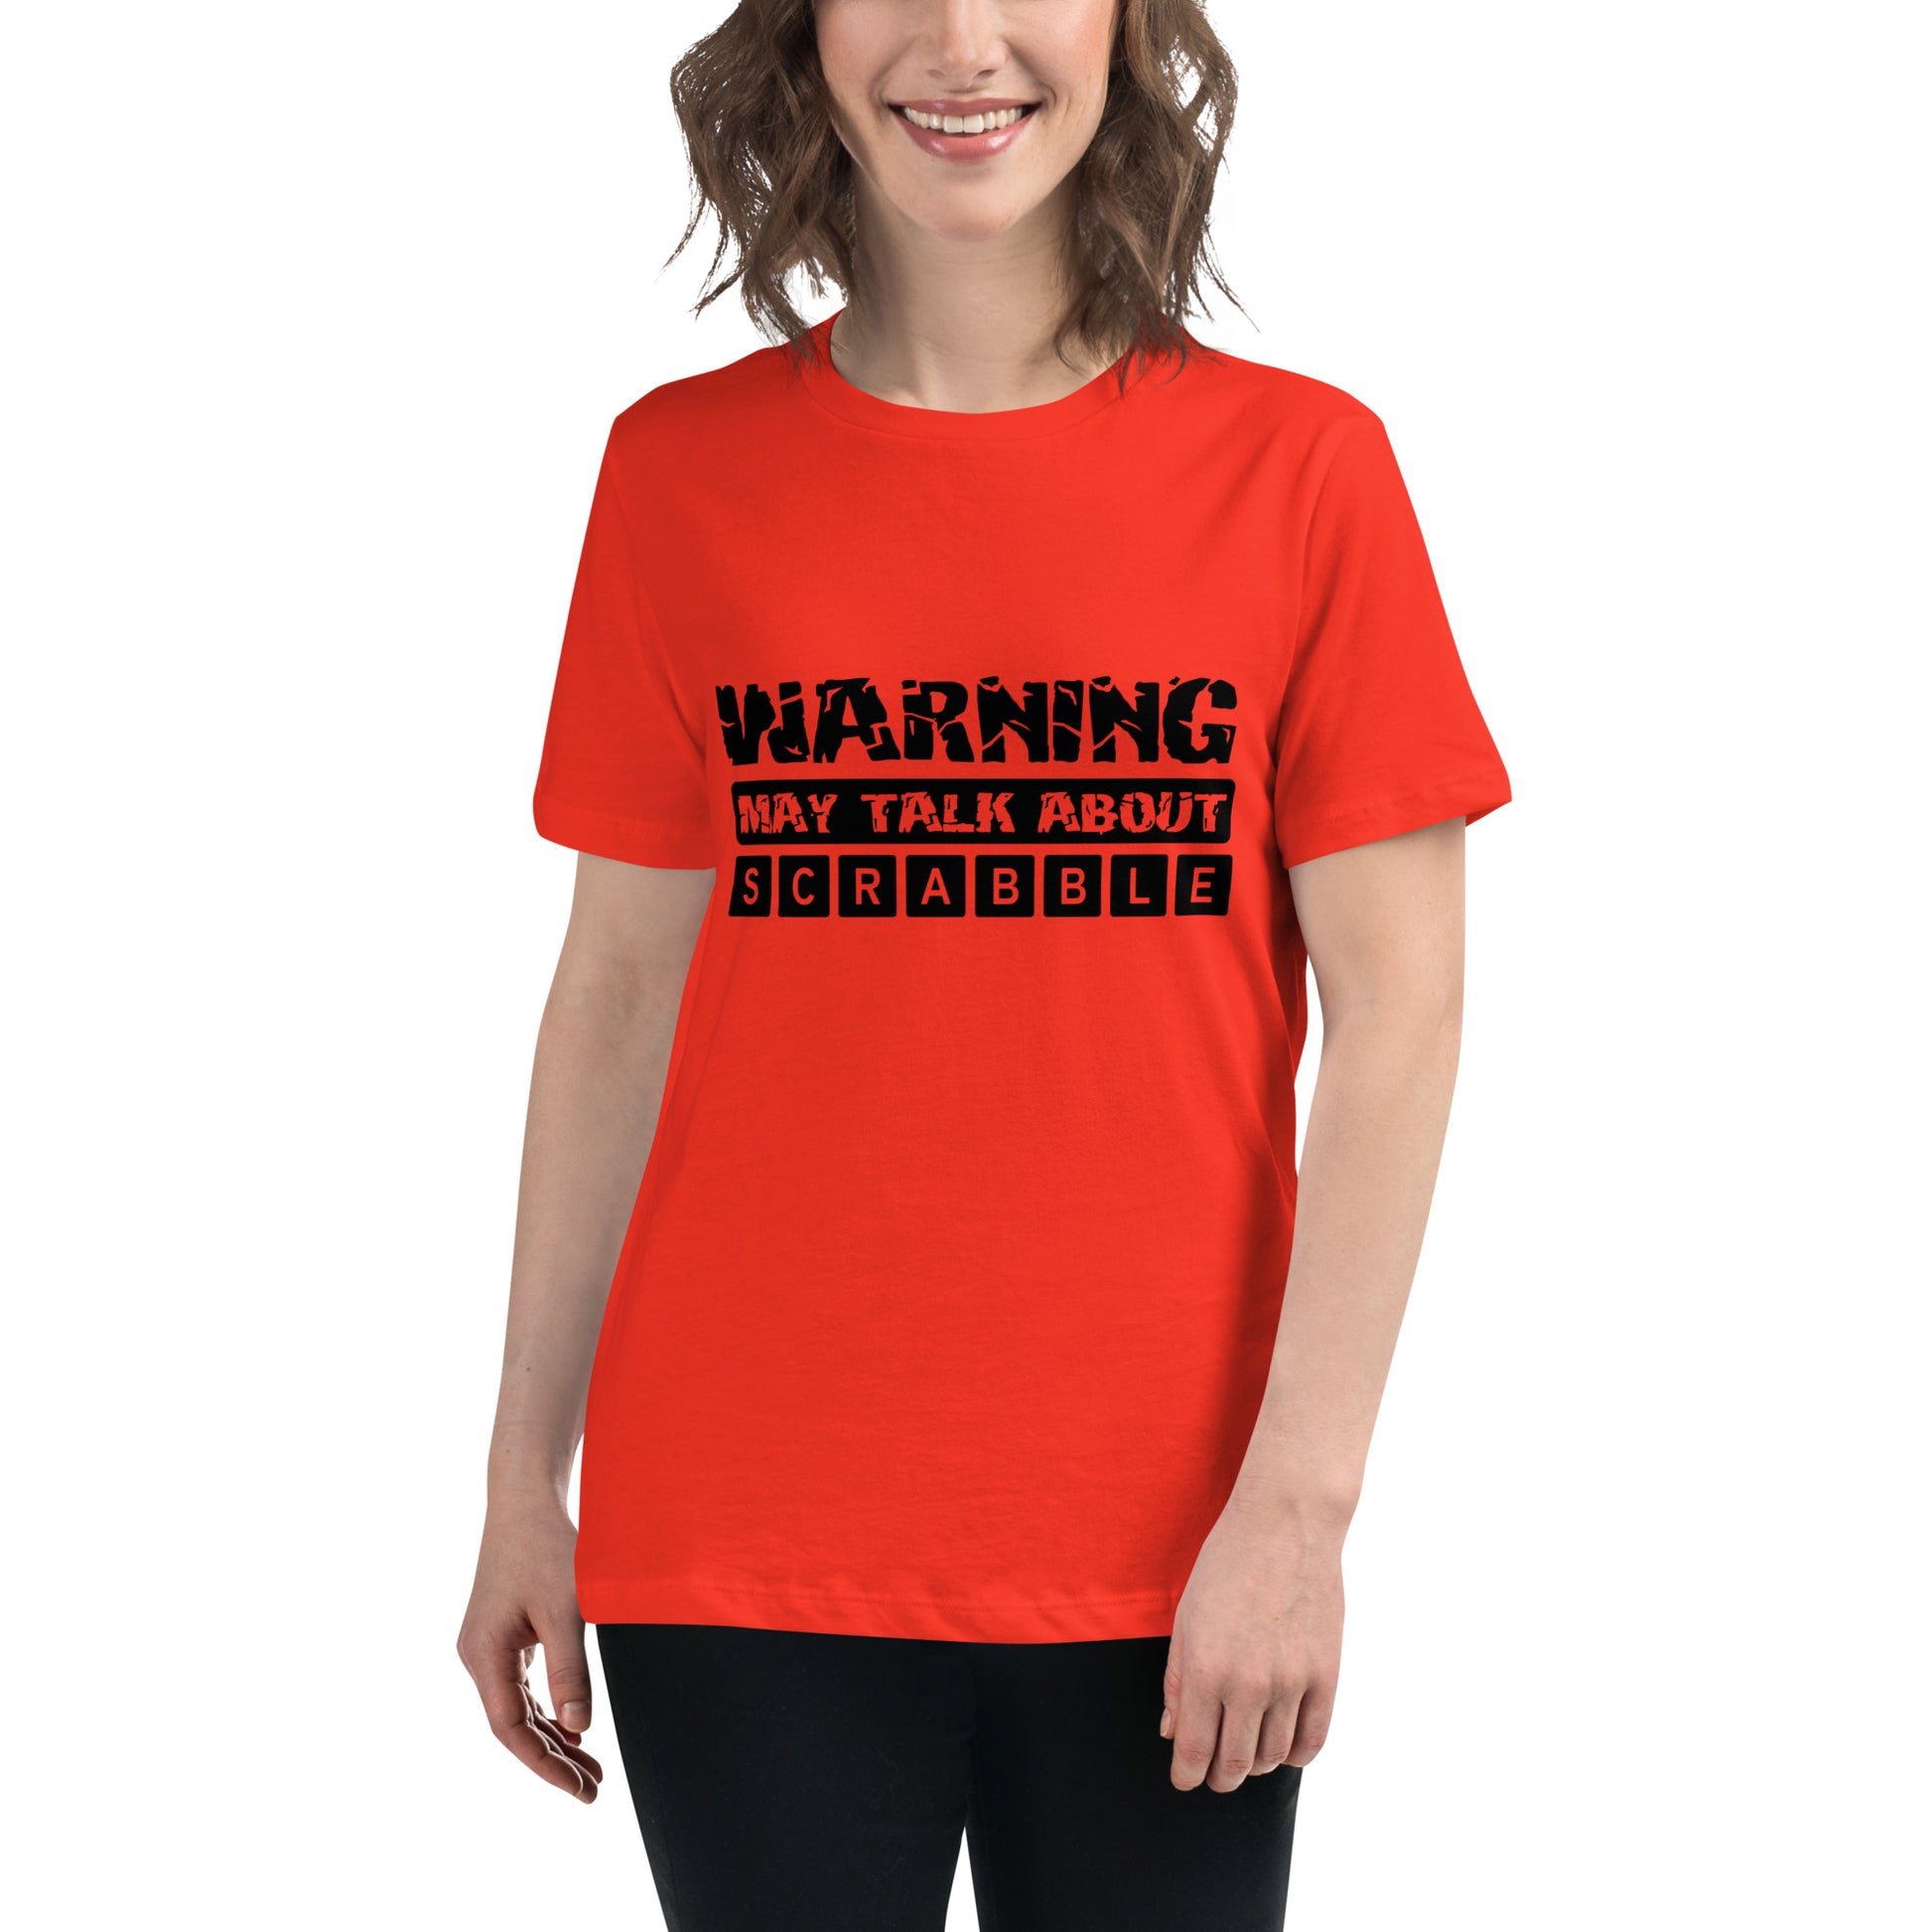 Warning May Talk About Scrabble Women's Relaxed T-Shirt